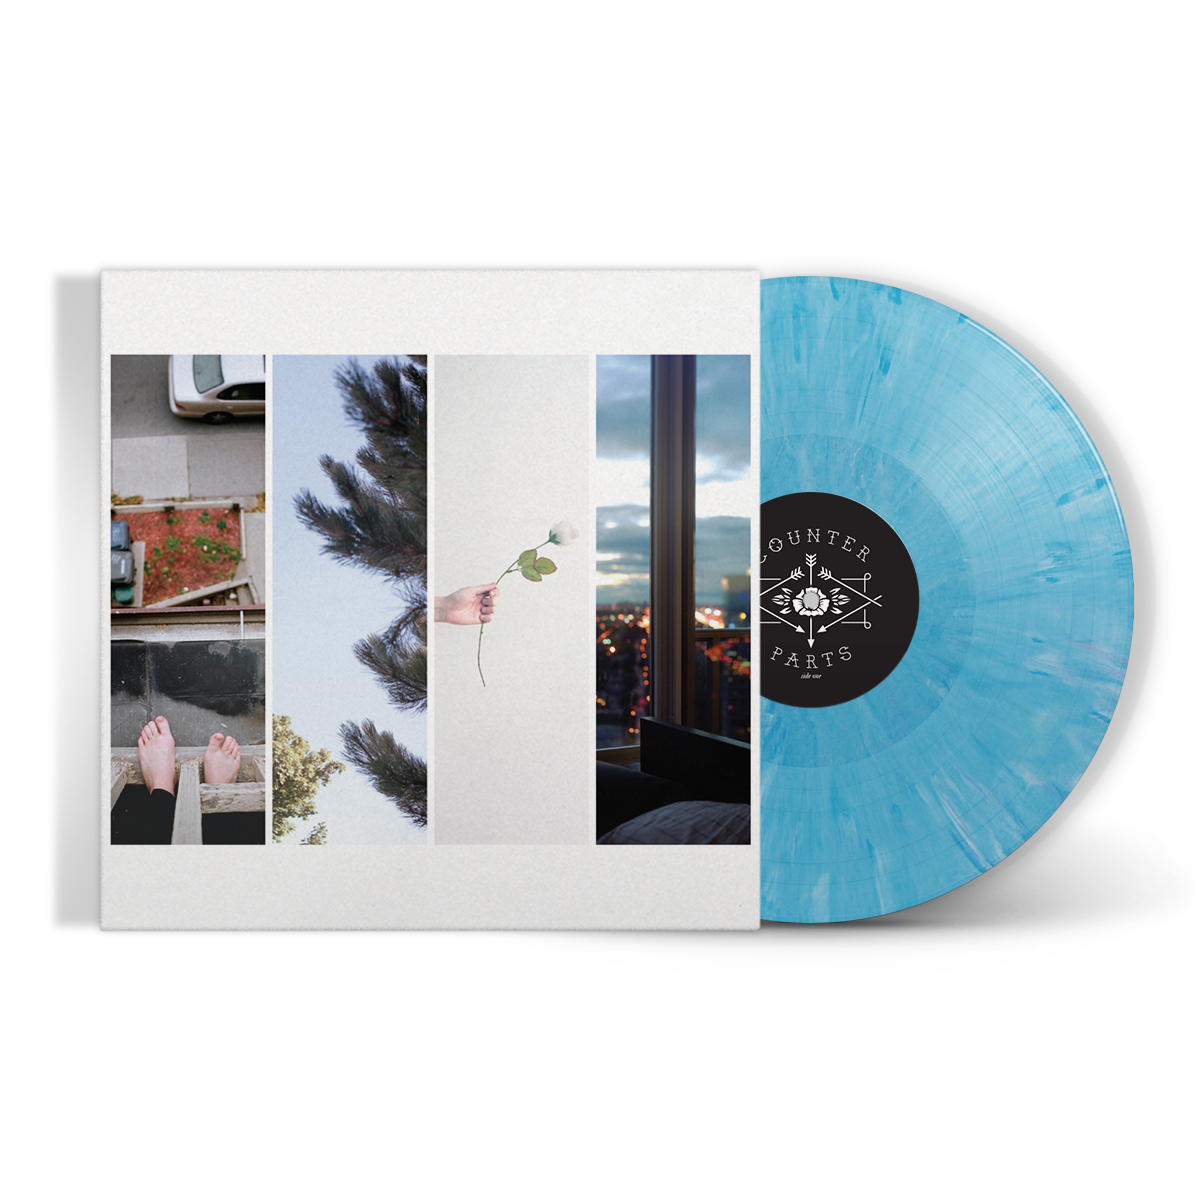 The Difference Between Hell And Home (Limited Edition Exclusive Sky Blue Splatter LP)